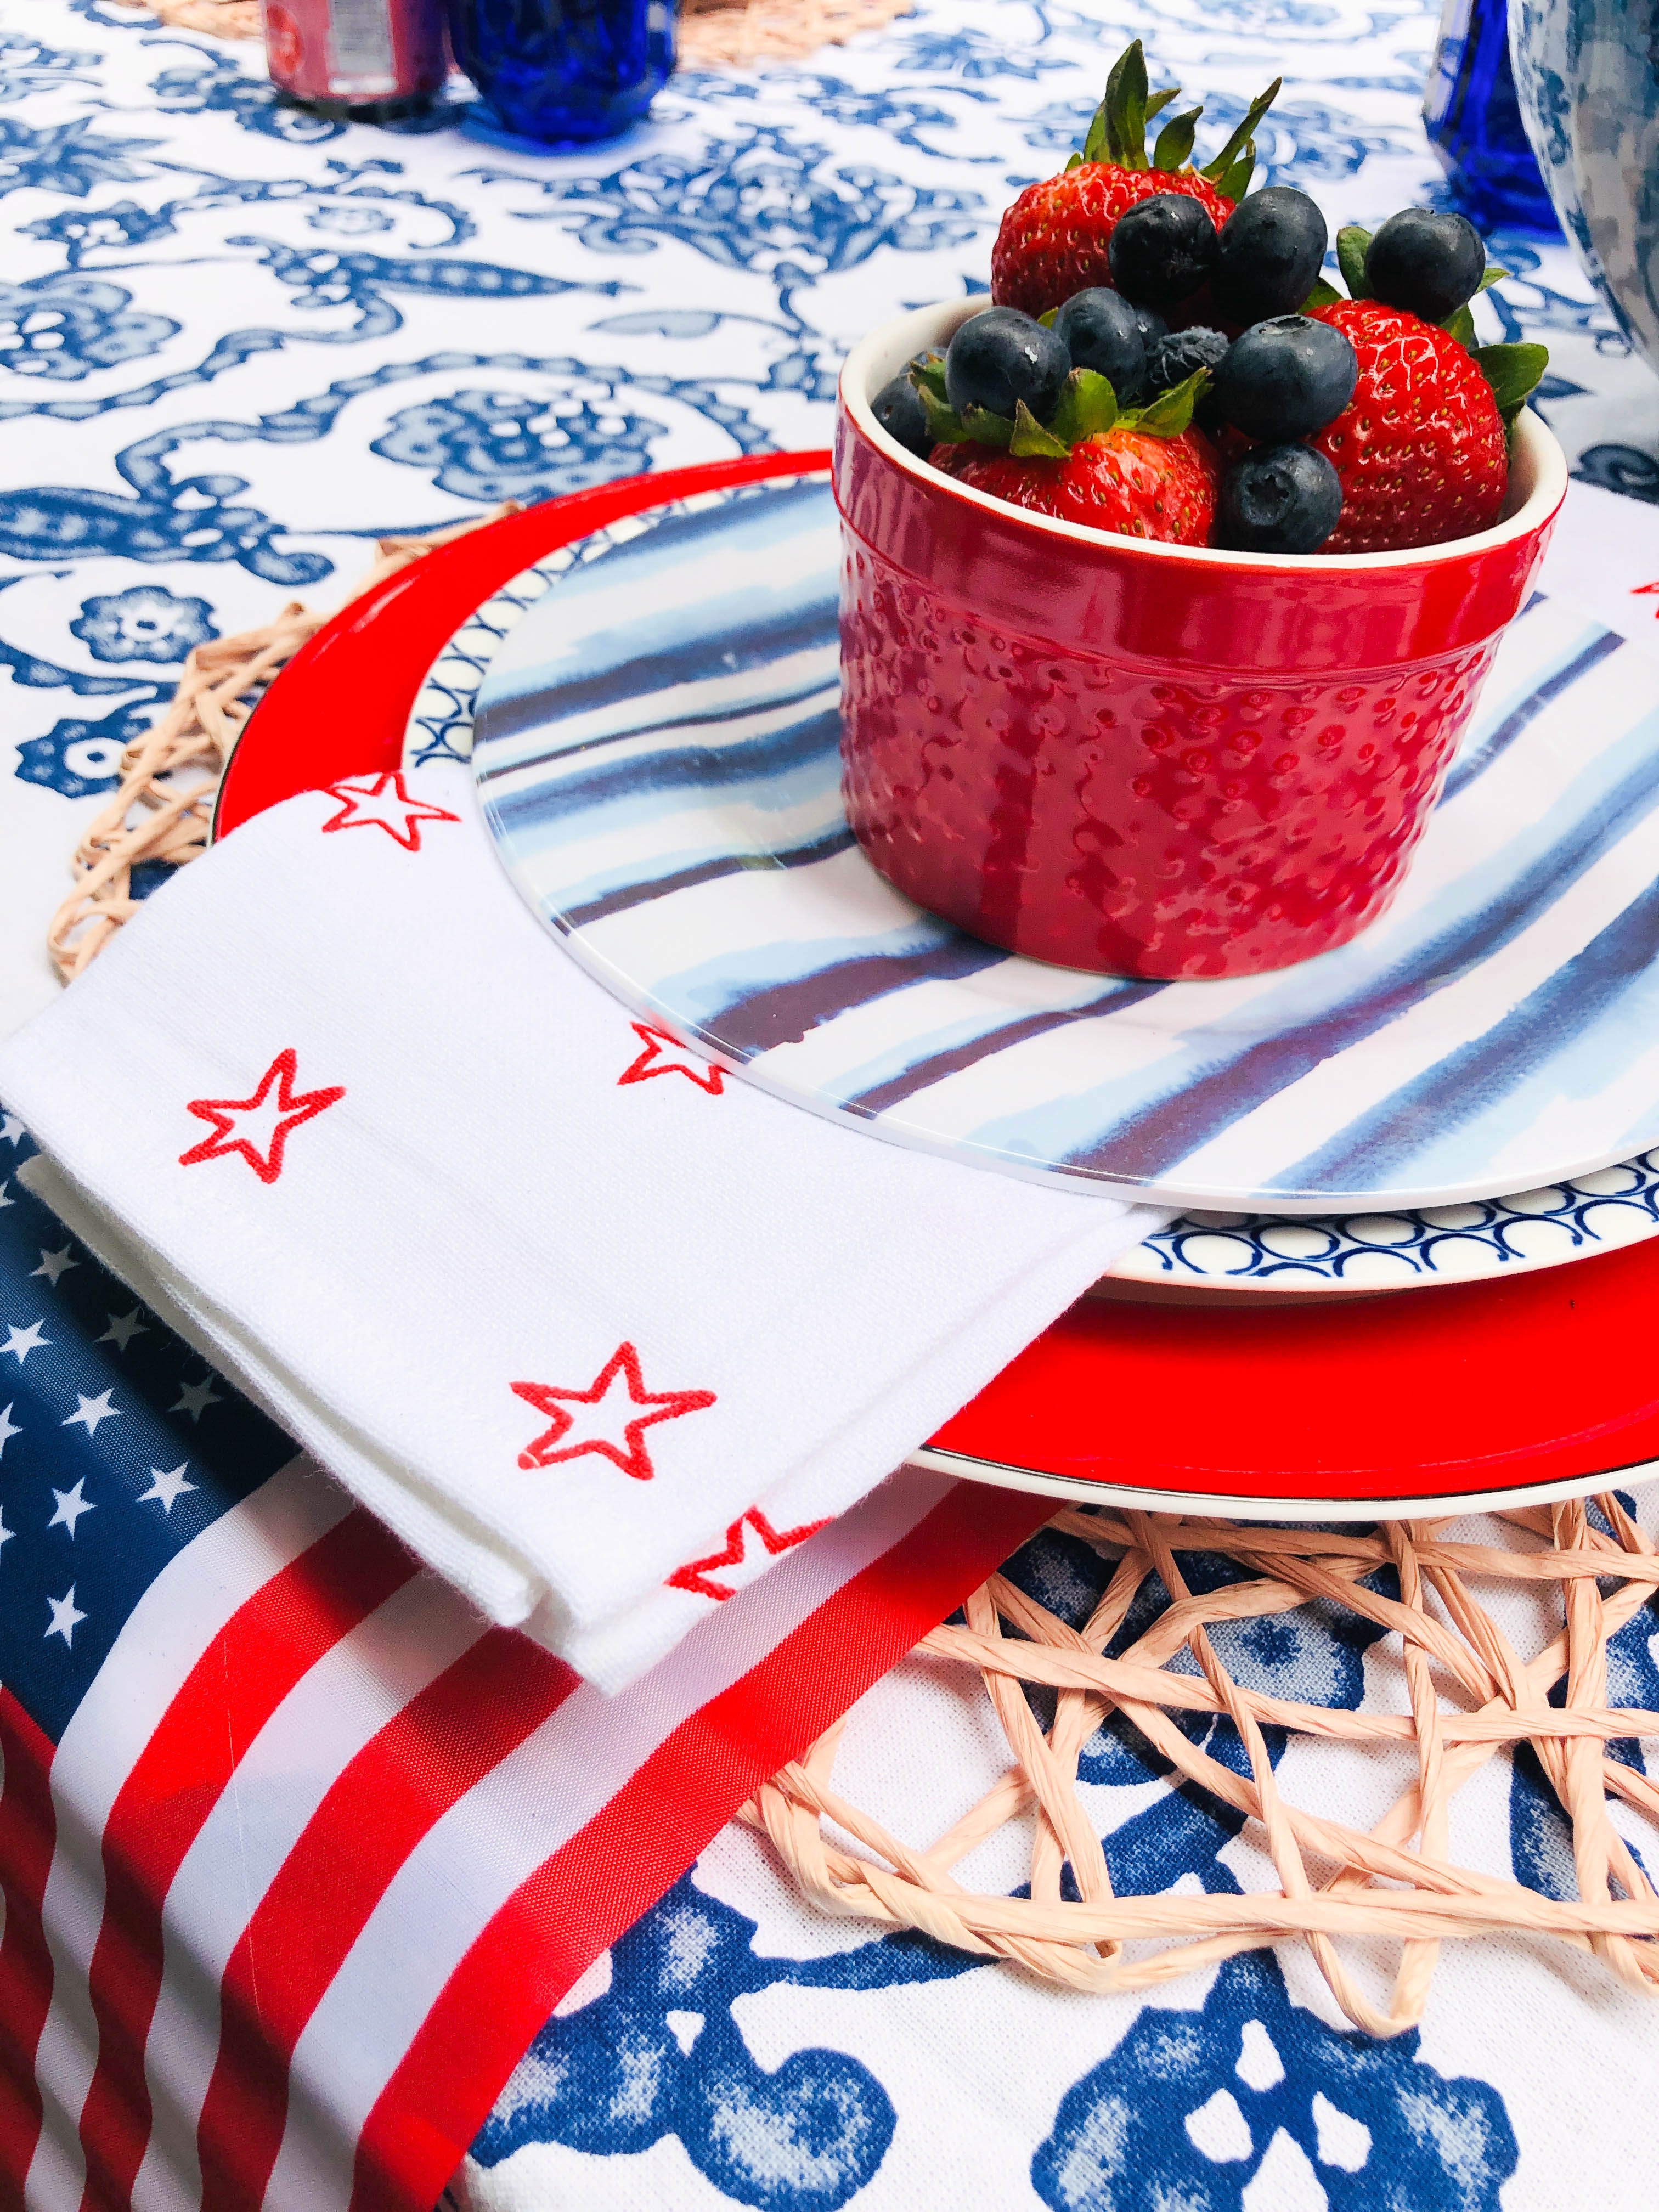 The 4th of July table  setting with three stacked plates on top of a woven placemat used as decorations.